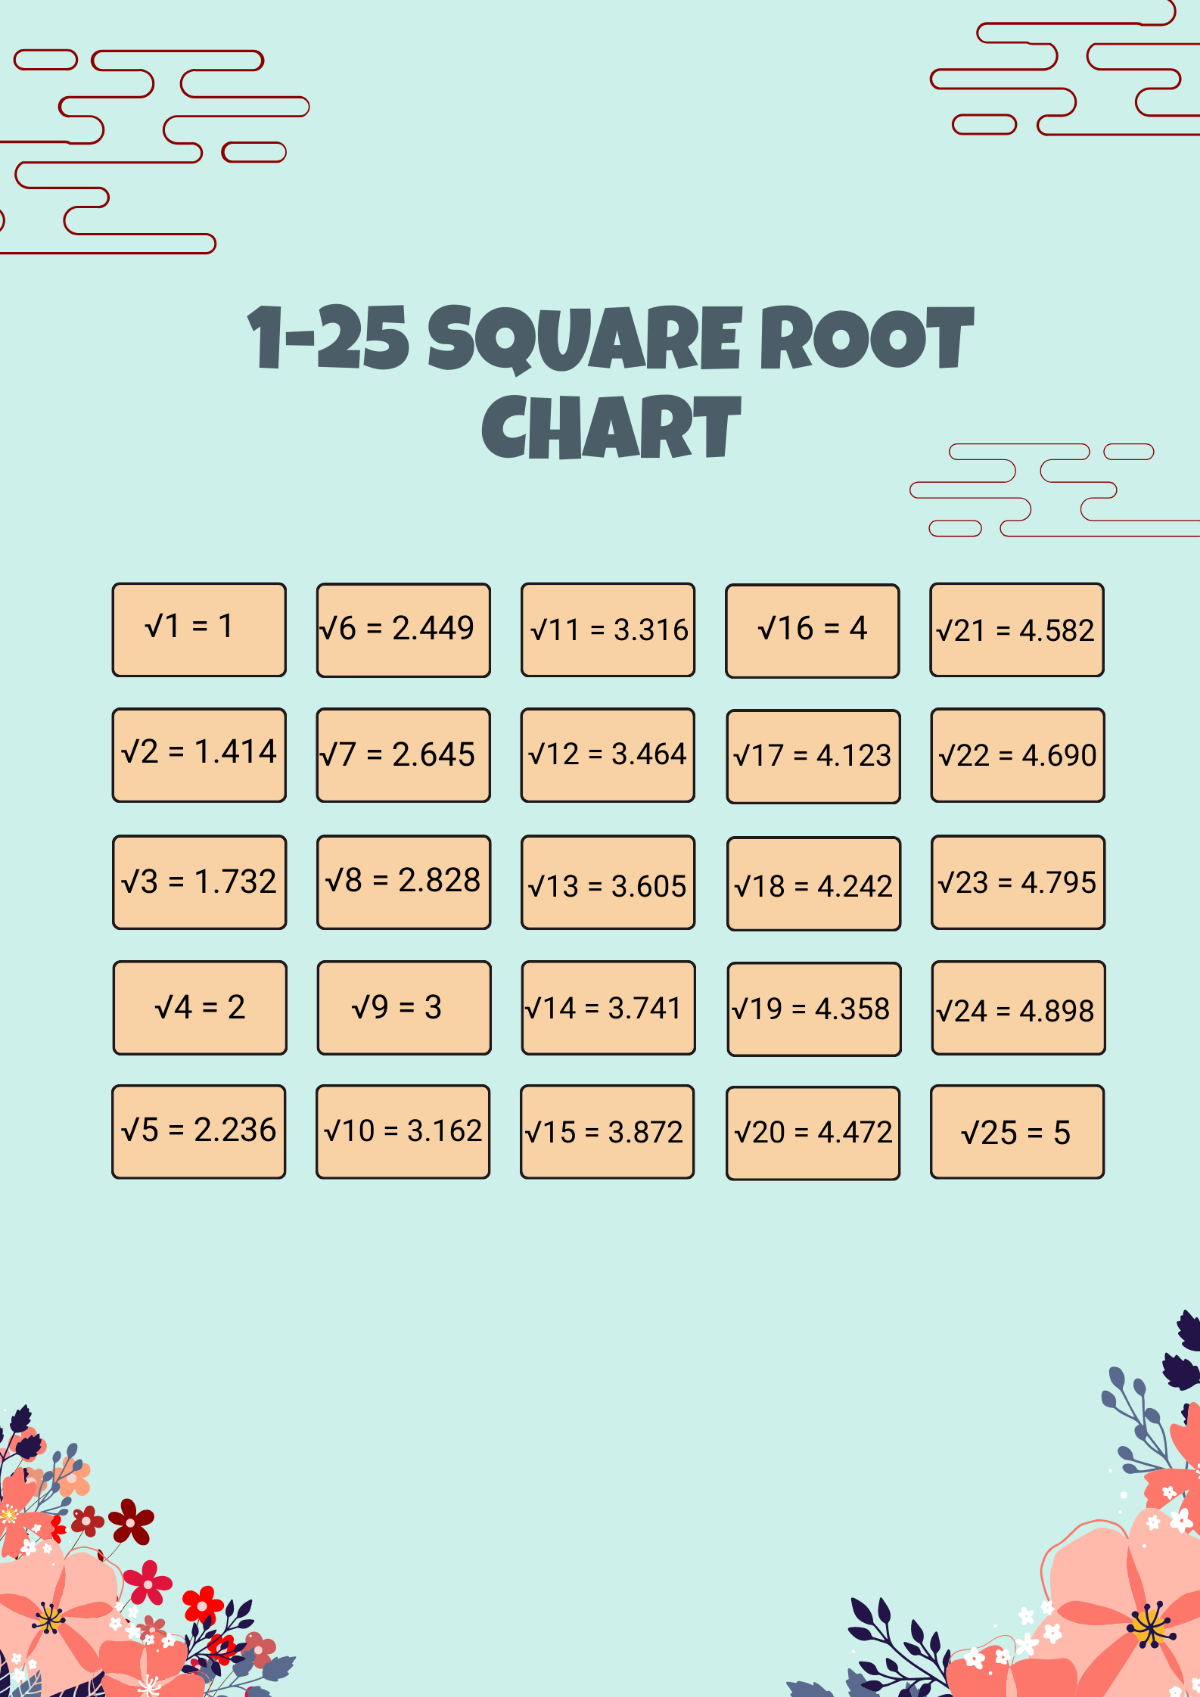 Free 1-25 Square Root Chart